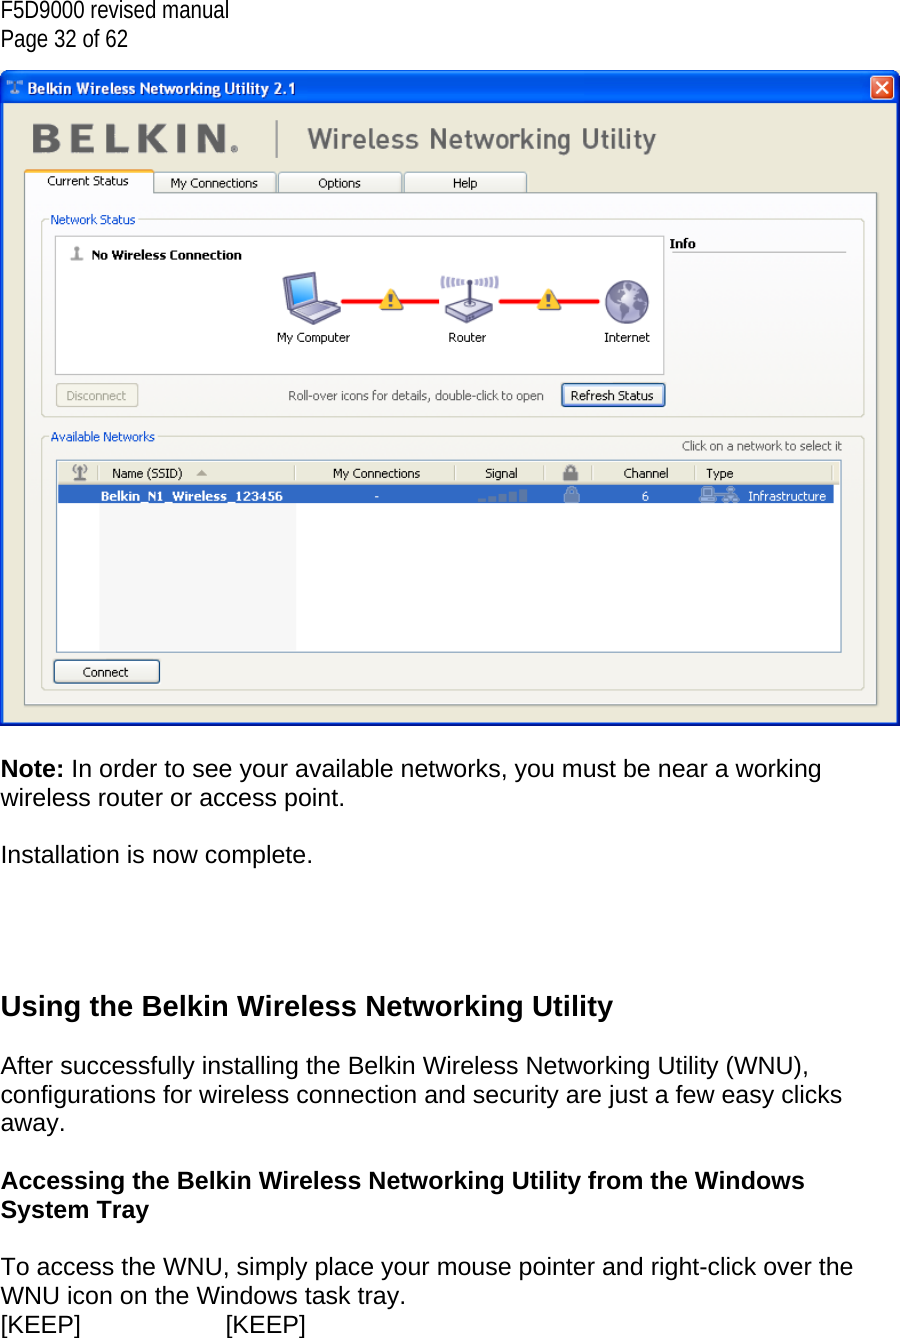 F5D9000 revised manual Page 32 of 62   Note: In order to see your available networks, you must be near a working wireless router or access point.  Installation is now complete.     Using the Belkin Wireless Networking Utility   After successfully installing the Belkin Wireless Networking Utility (WNU), configurations for wireless connection and security are just a few easy clicks away.  Accessing the Belkin Wireless Networking Utility from the Windows System Tray  To access the WNU, simply place your mouse pointer and right-click over the WNU icon on the Windows task tray.  [KEEP]   [KEEP] 